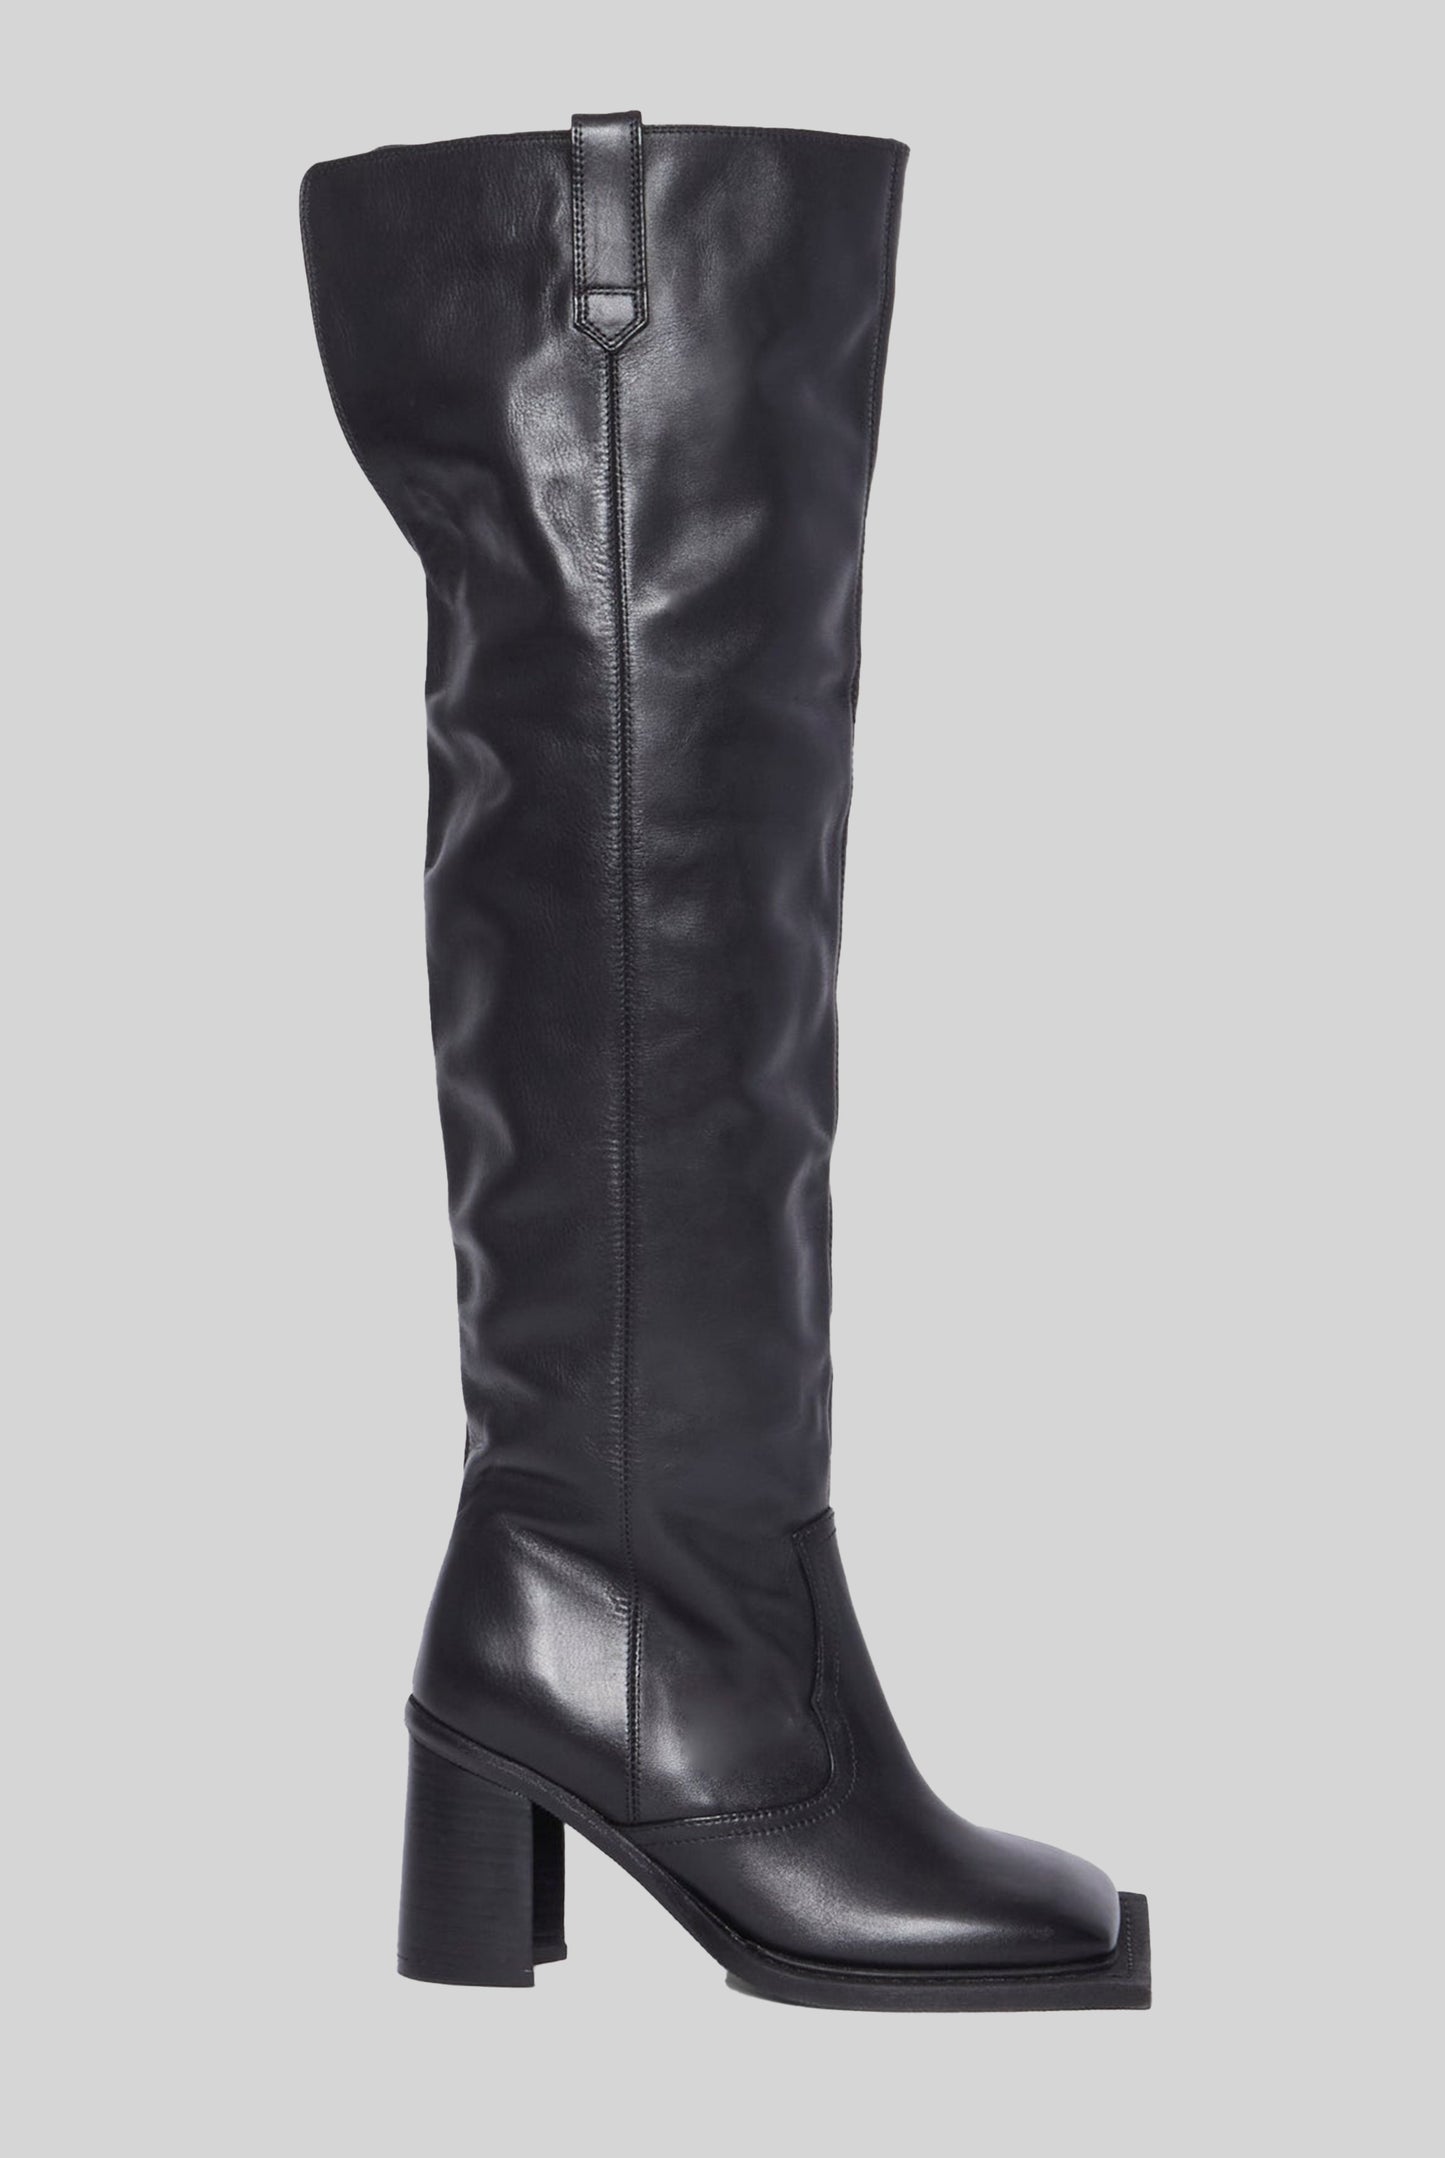 Howling Knee High Boots in Black